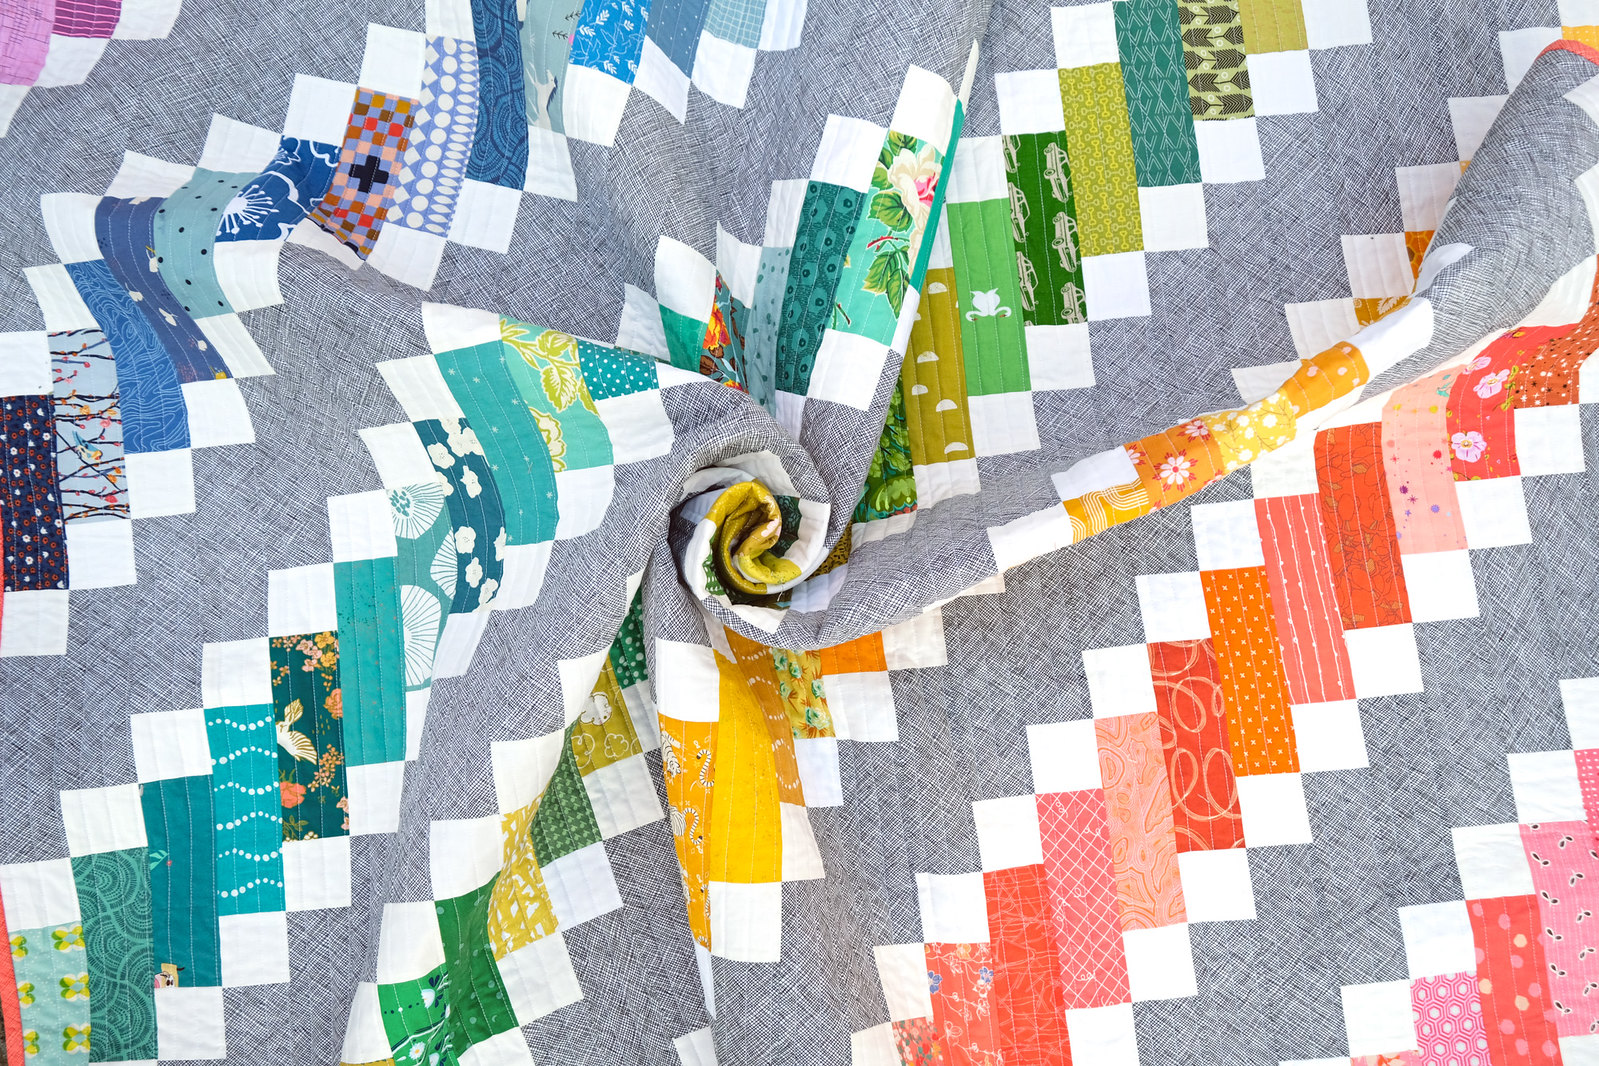 A vibrant rainbow quilt using the Ruby Quilt Pattern by Kitchen Table Quilting. The quilt is beautifully crafted with a rainbow of colorful scraps, creating a stunning visual display of patchwork